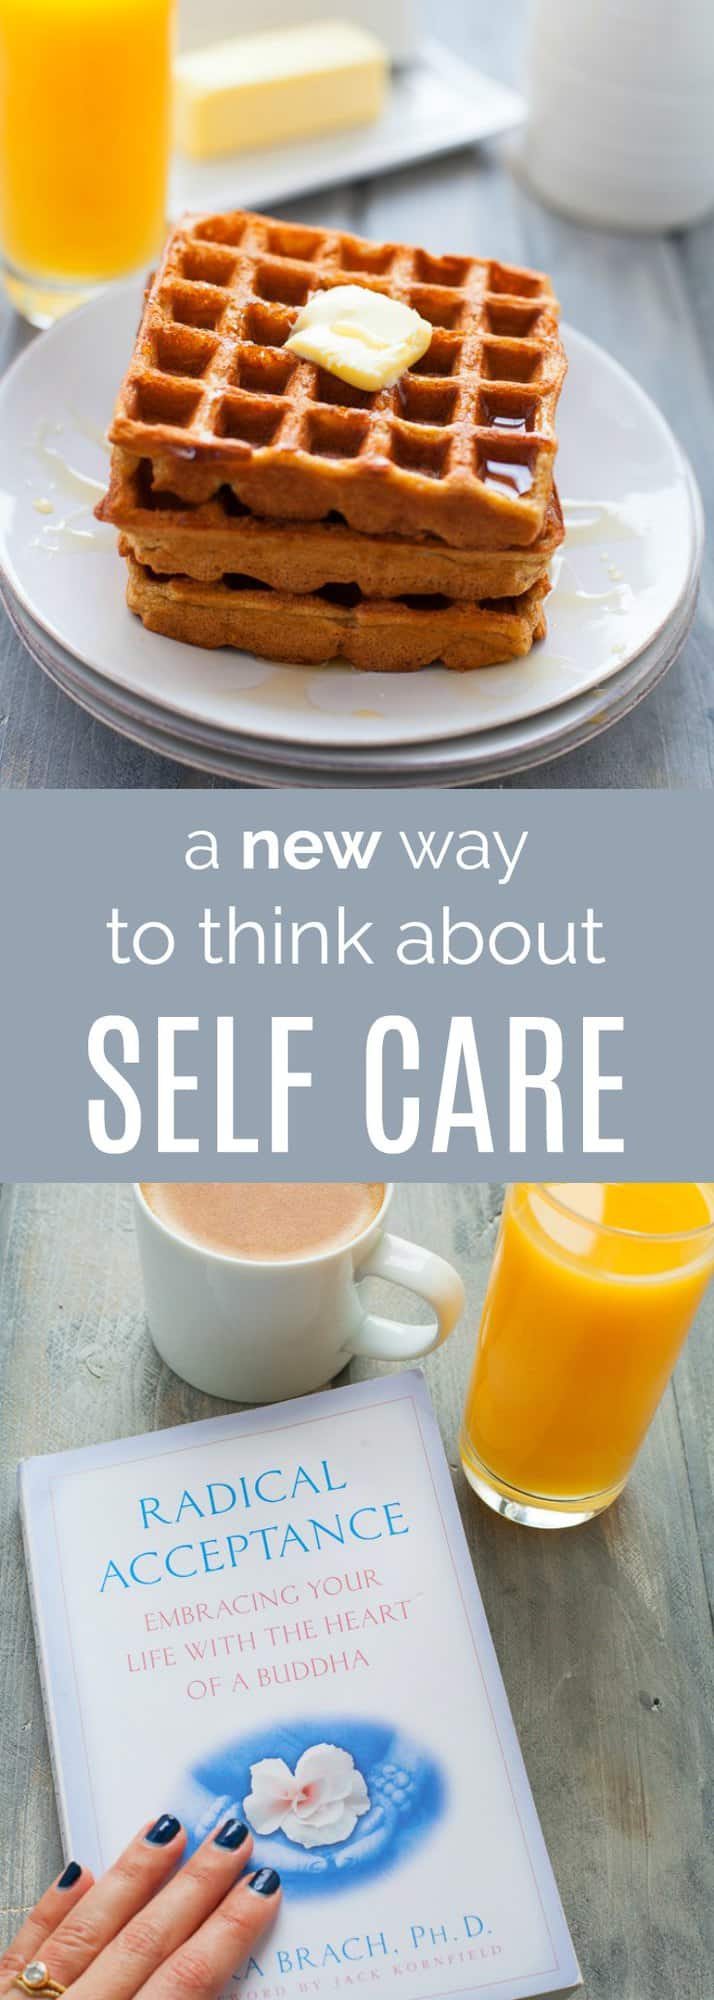 Getting caught up in all the pictures of green juices and spa retreats and massages on Instagram and feeling overwhelmed by self care? I've got a new way to think about self care that will help you feel excited about self care and not shameful.